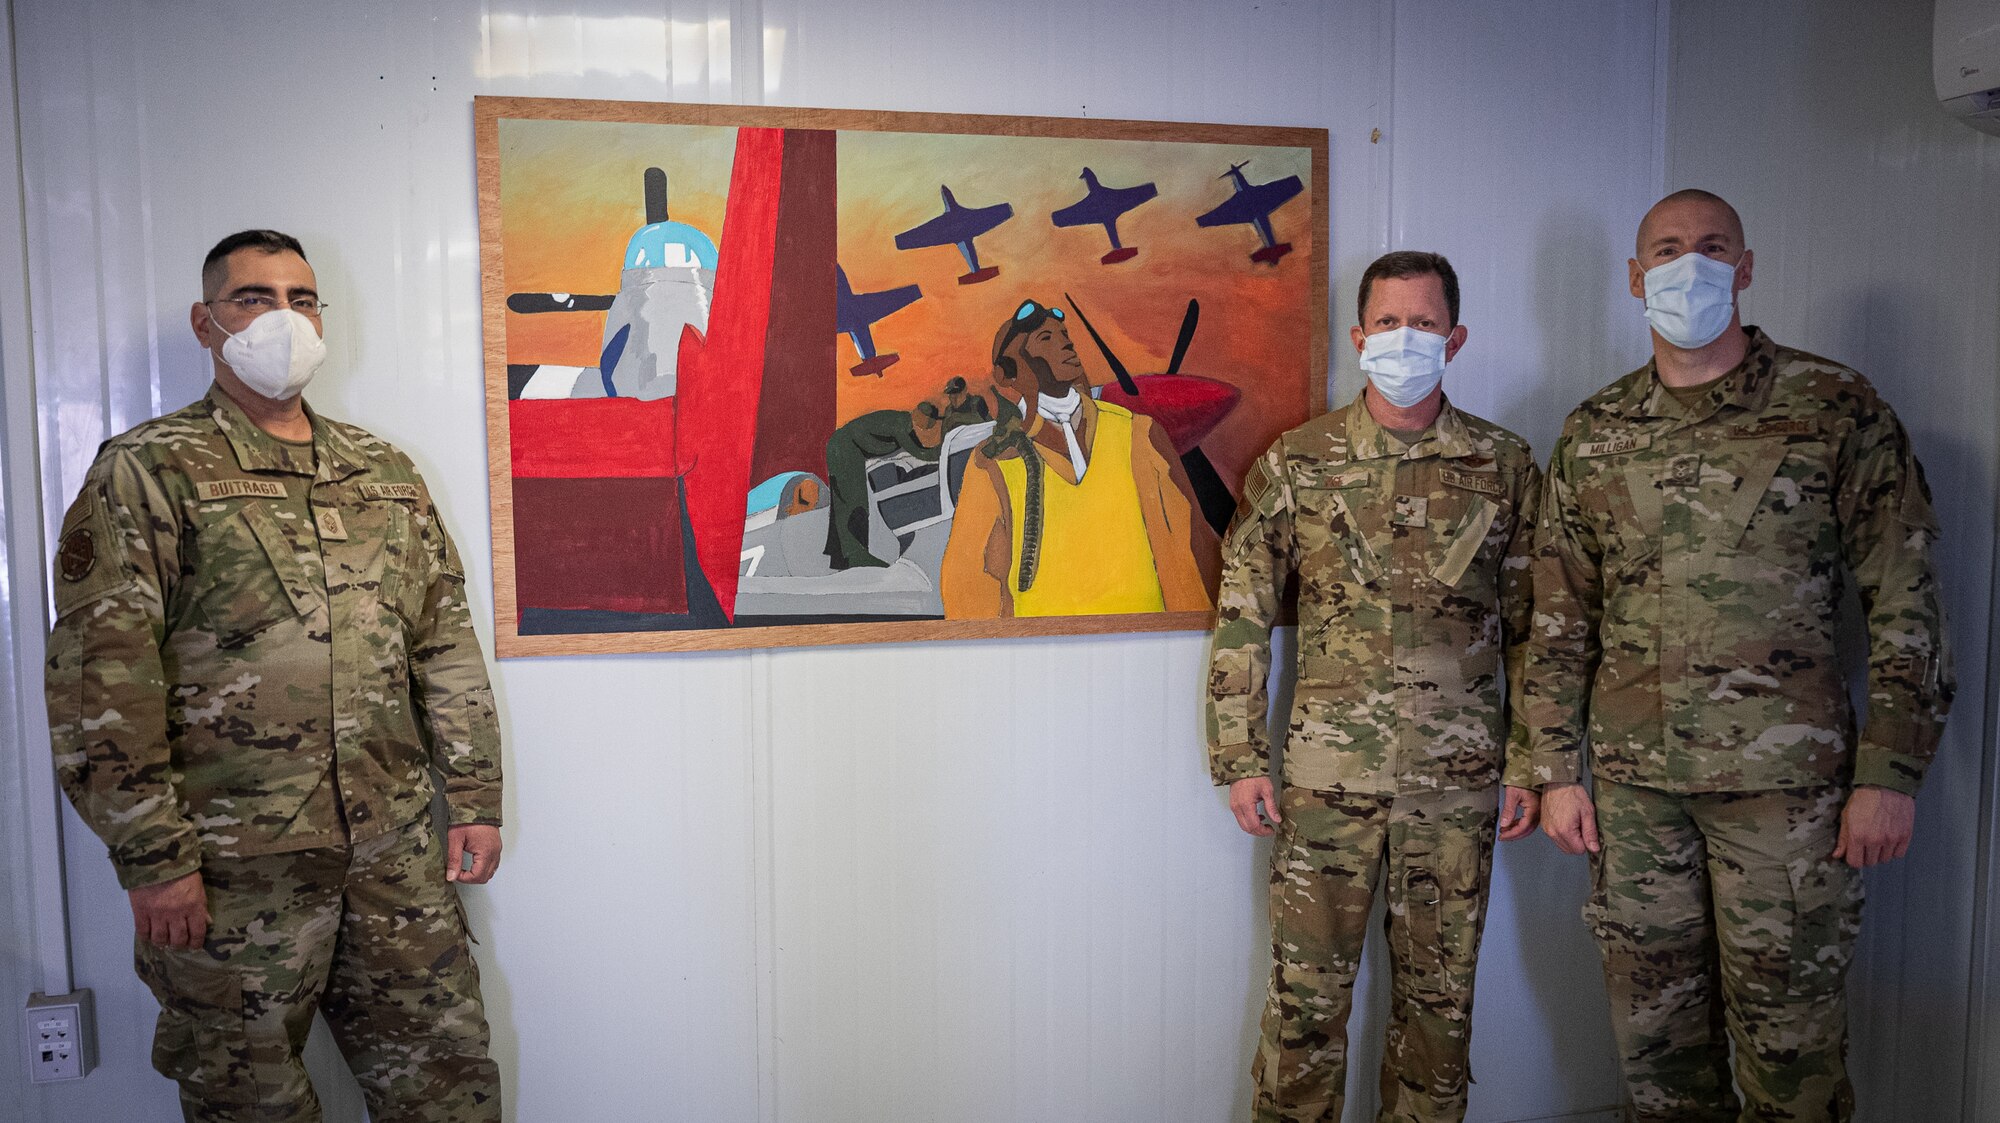 U.S. Air Force Brig. Gen. Christopher Sage, 332d Air Expeditionary Wing commander, center and Chief Master Sgt. Sean Milligan, command chief, right, stand with Senior Master Sgt. Fernando Buitrago, 332d Expeditionary Logistics Readiness Squadron senior enlisted leader inside the Red Tail Center of Excellence as they pose with the finished pieces of the Legacy Project, January 26, 2022, Southwest Asia.  The Legacy Project is a set of two paintings depicting the heritage and culture of the Tuskegee Airmen and the 332d AEW culture today, bringing past and present together. (U.S. Air Force photo by Master Sgt. Christopher Parr)